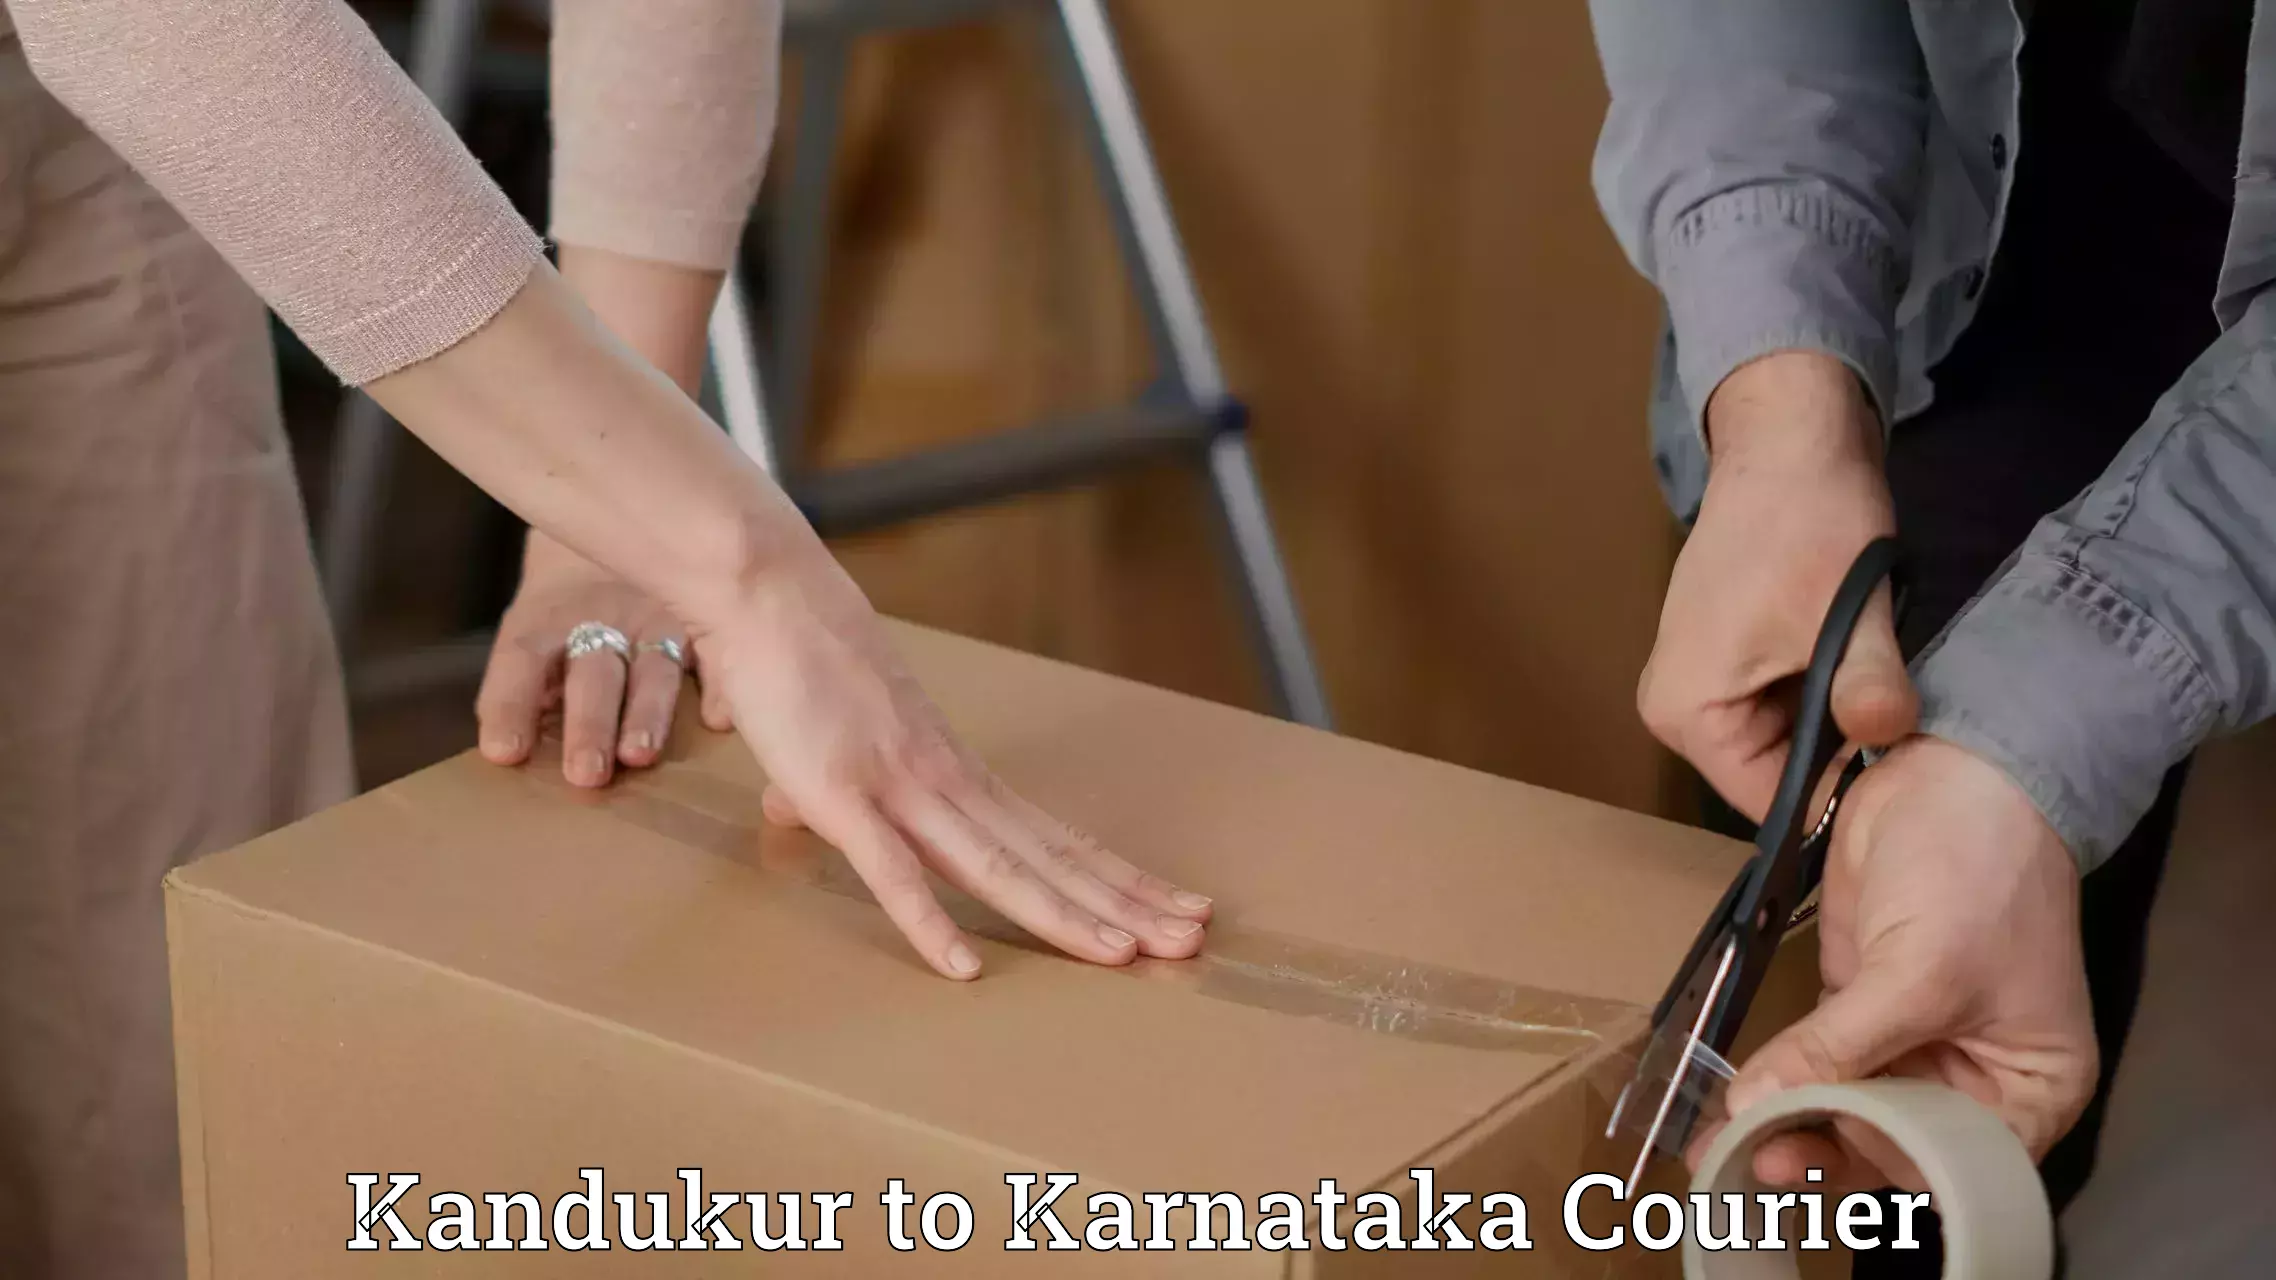 Special handling courier in Kandukur to Chittapur